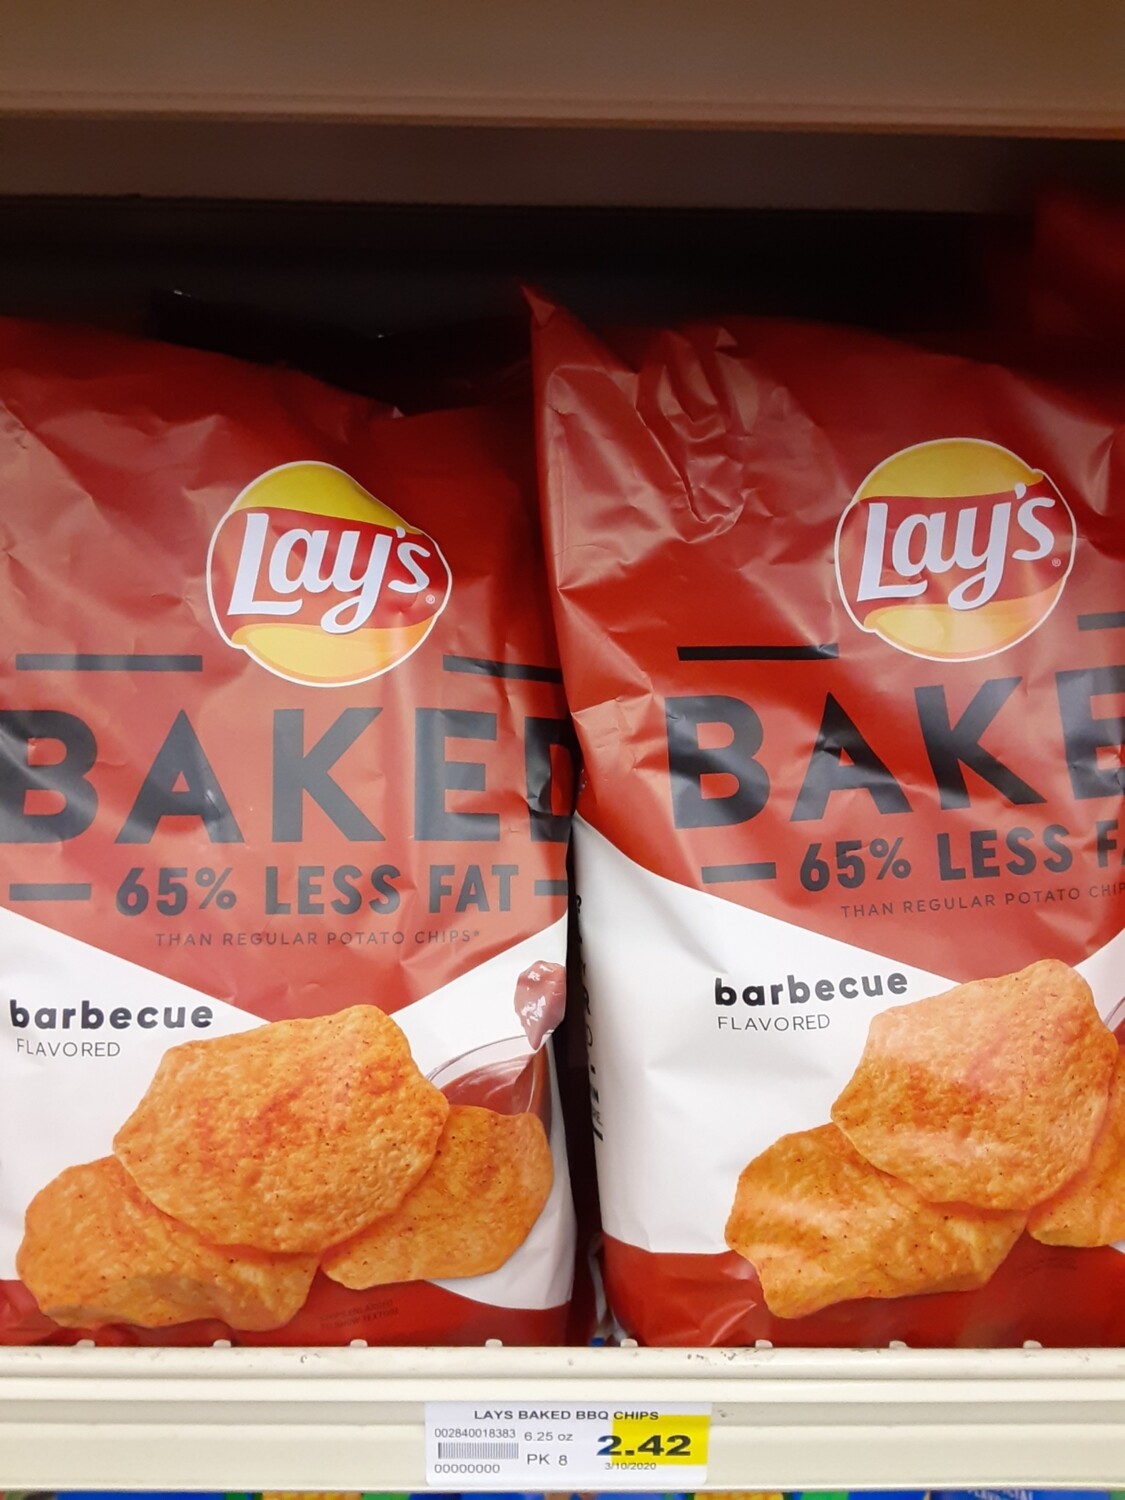 Cash Saver: Lays Baked Barbecue Chips 6.25oz